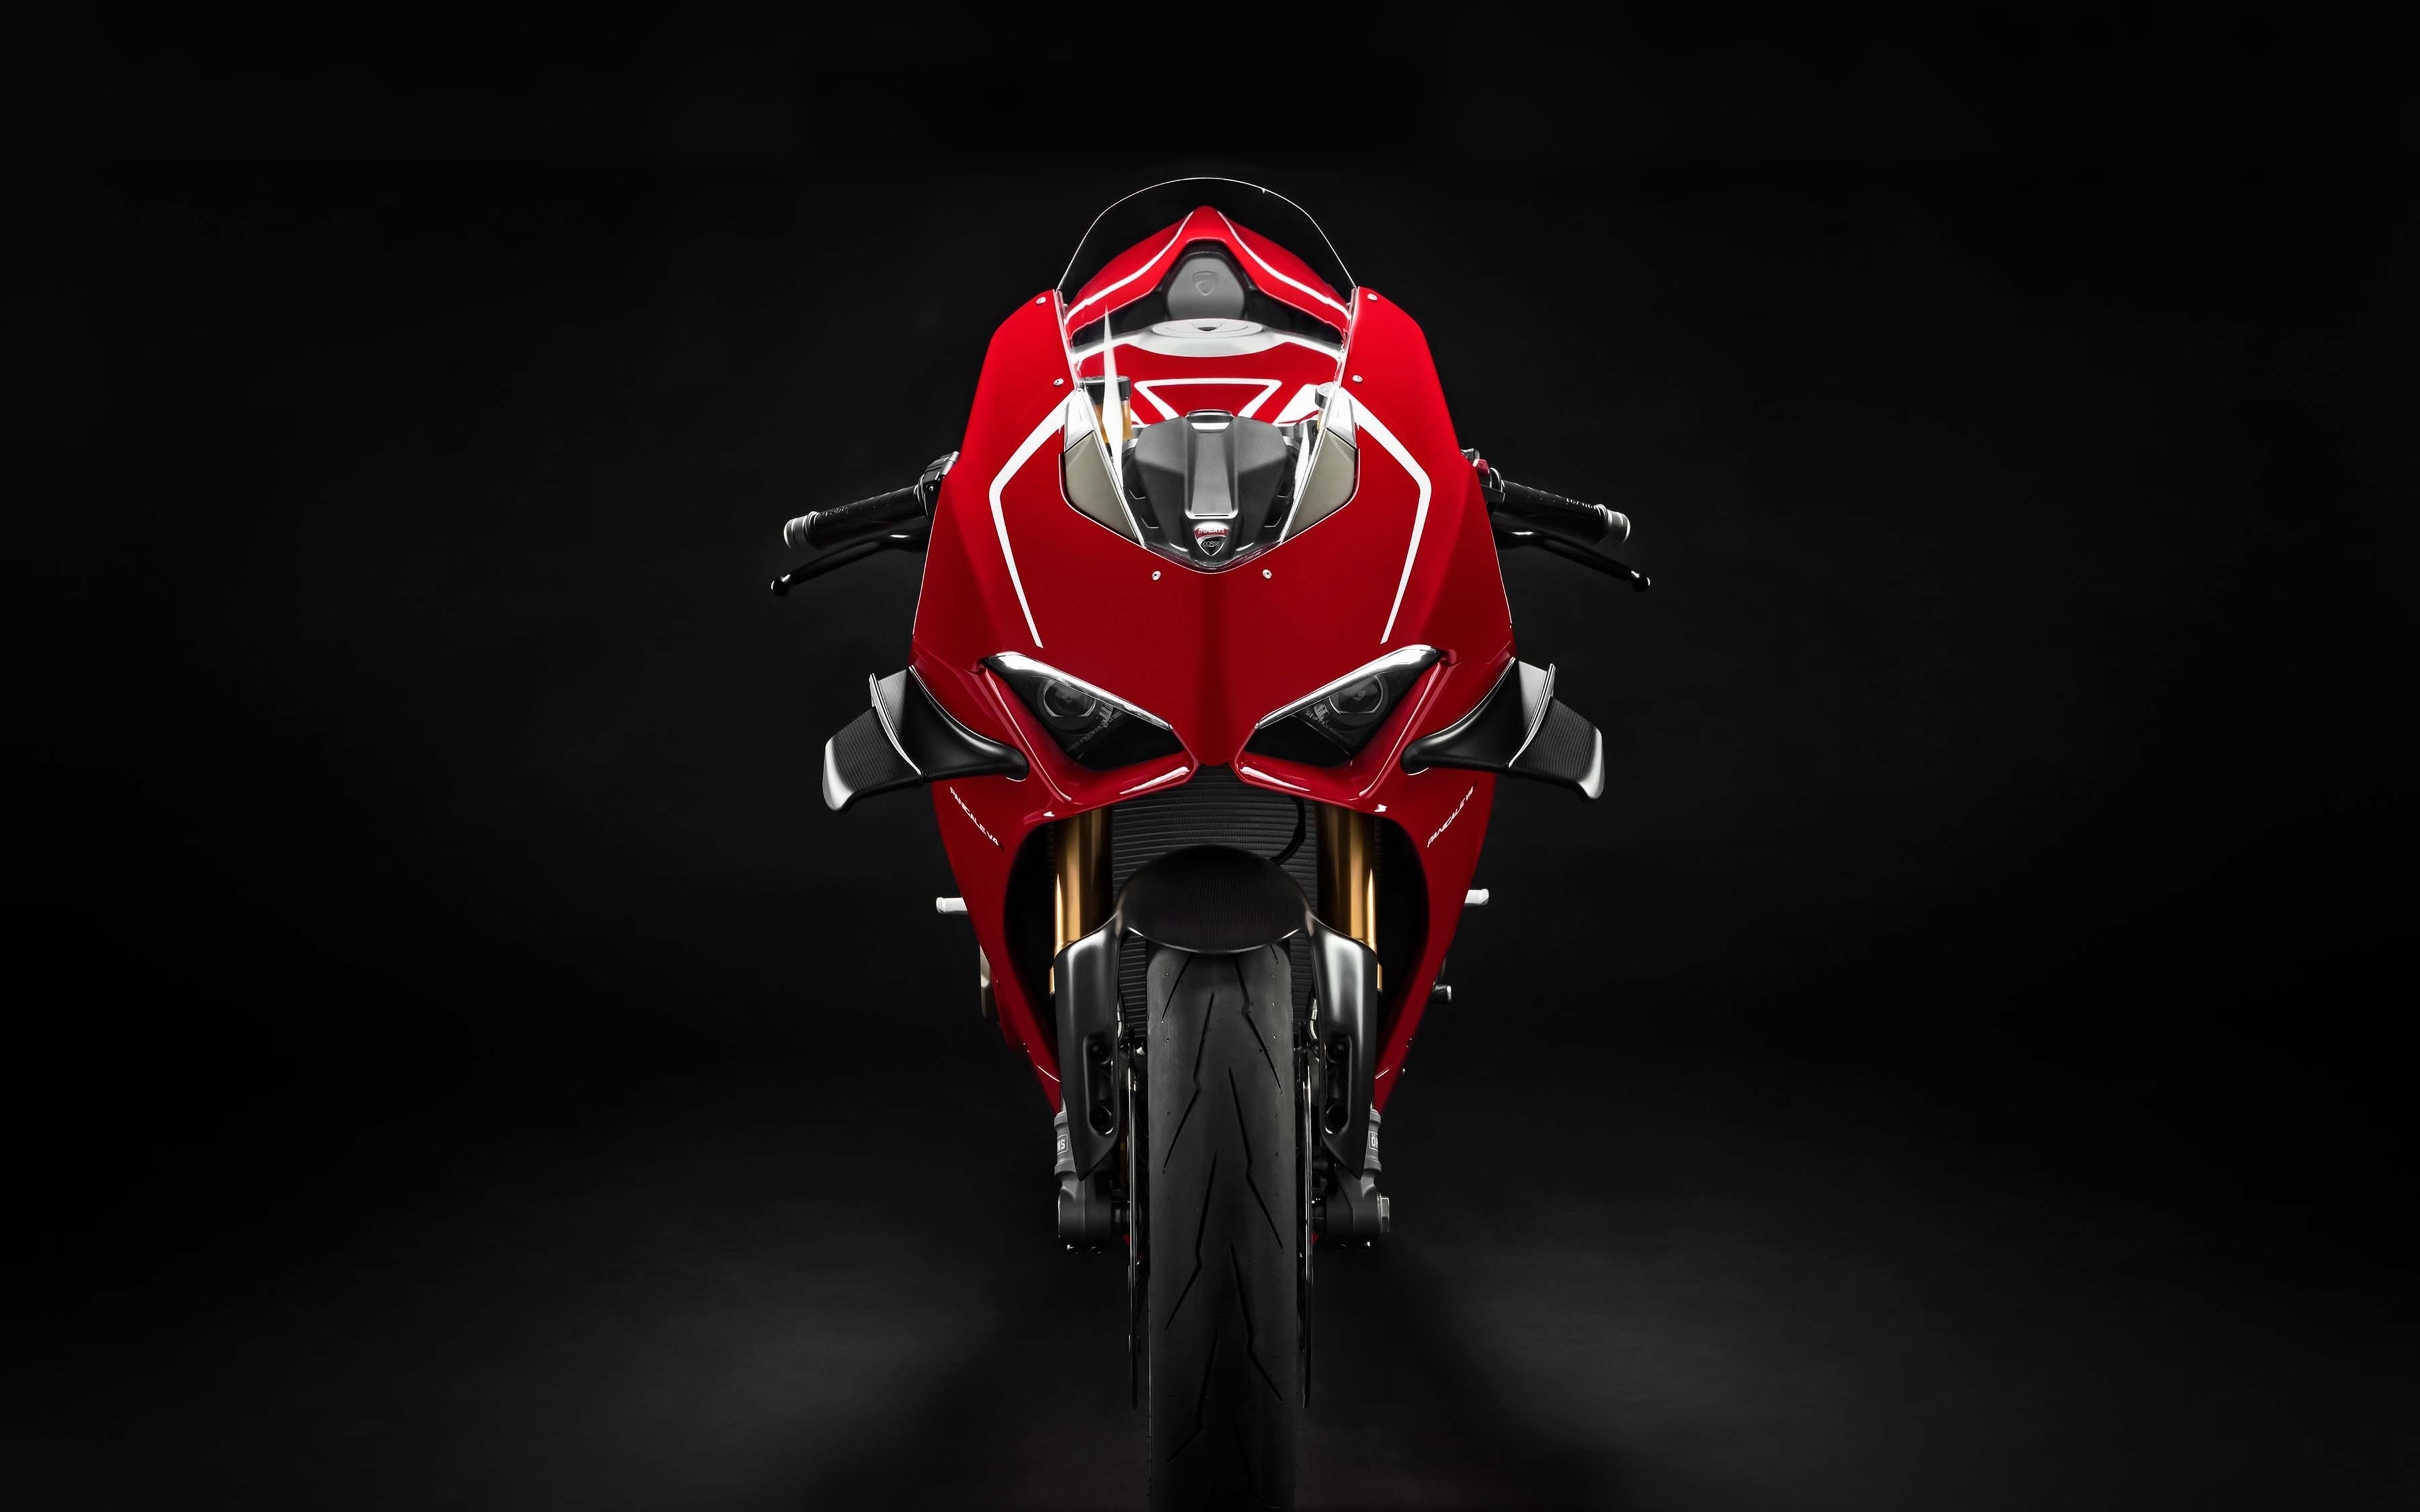 Panigale V4 R , HD Wallpaper & Backgrounds